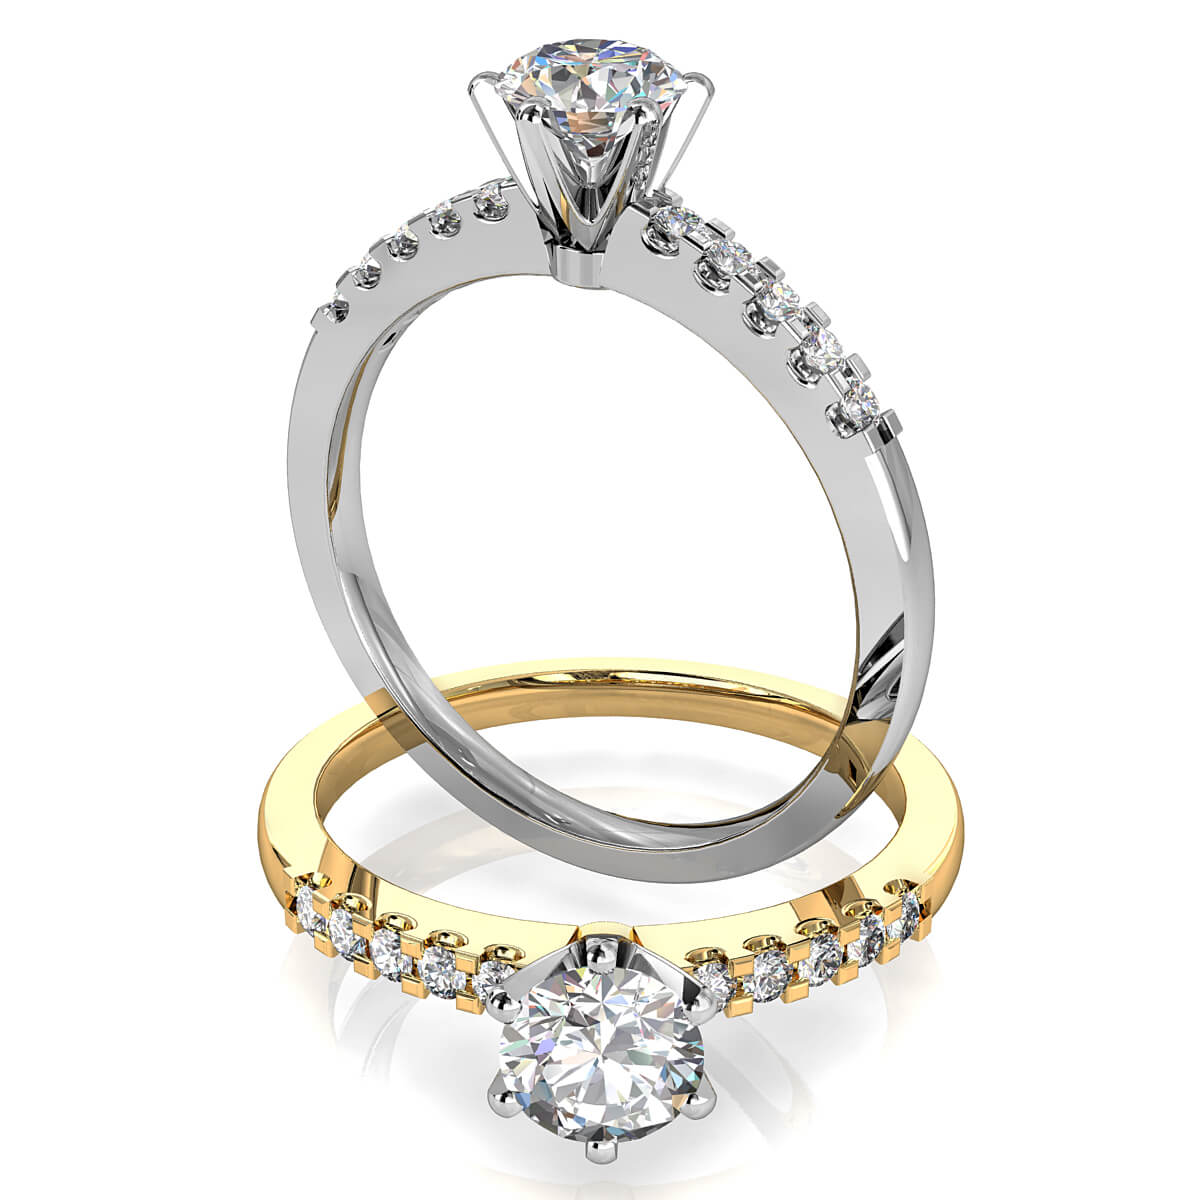 Round Brilliant Cut Solitaire Diamond Engagement Ring, 6 Button Claws Set on a Cut Claw Straight Band with Classic Undersetting.